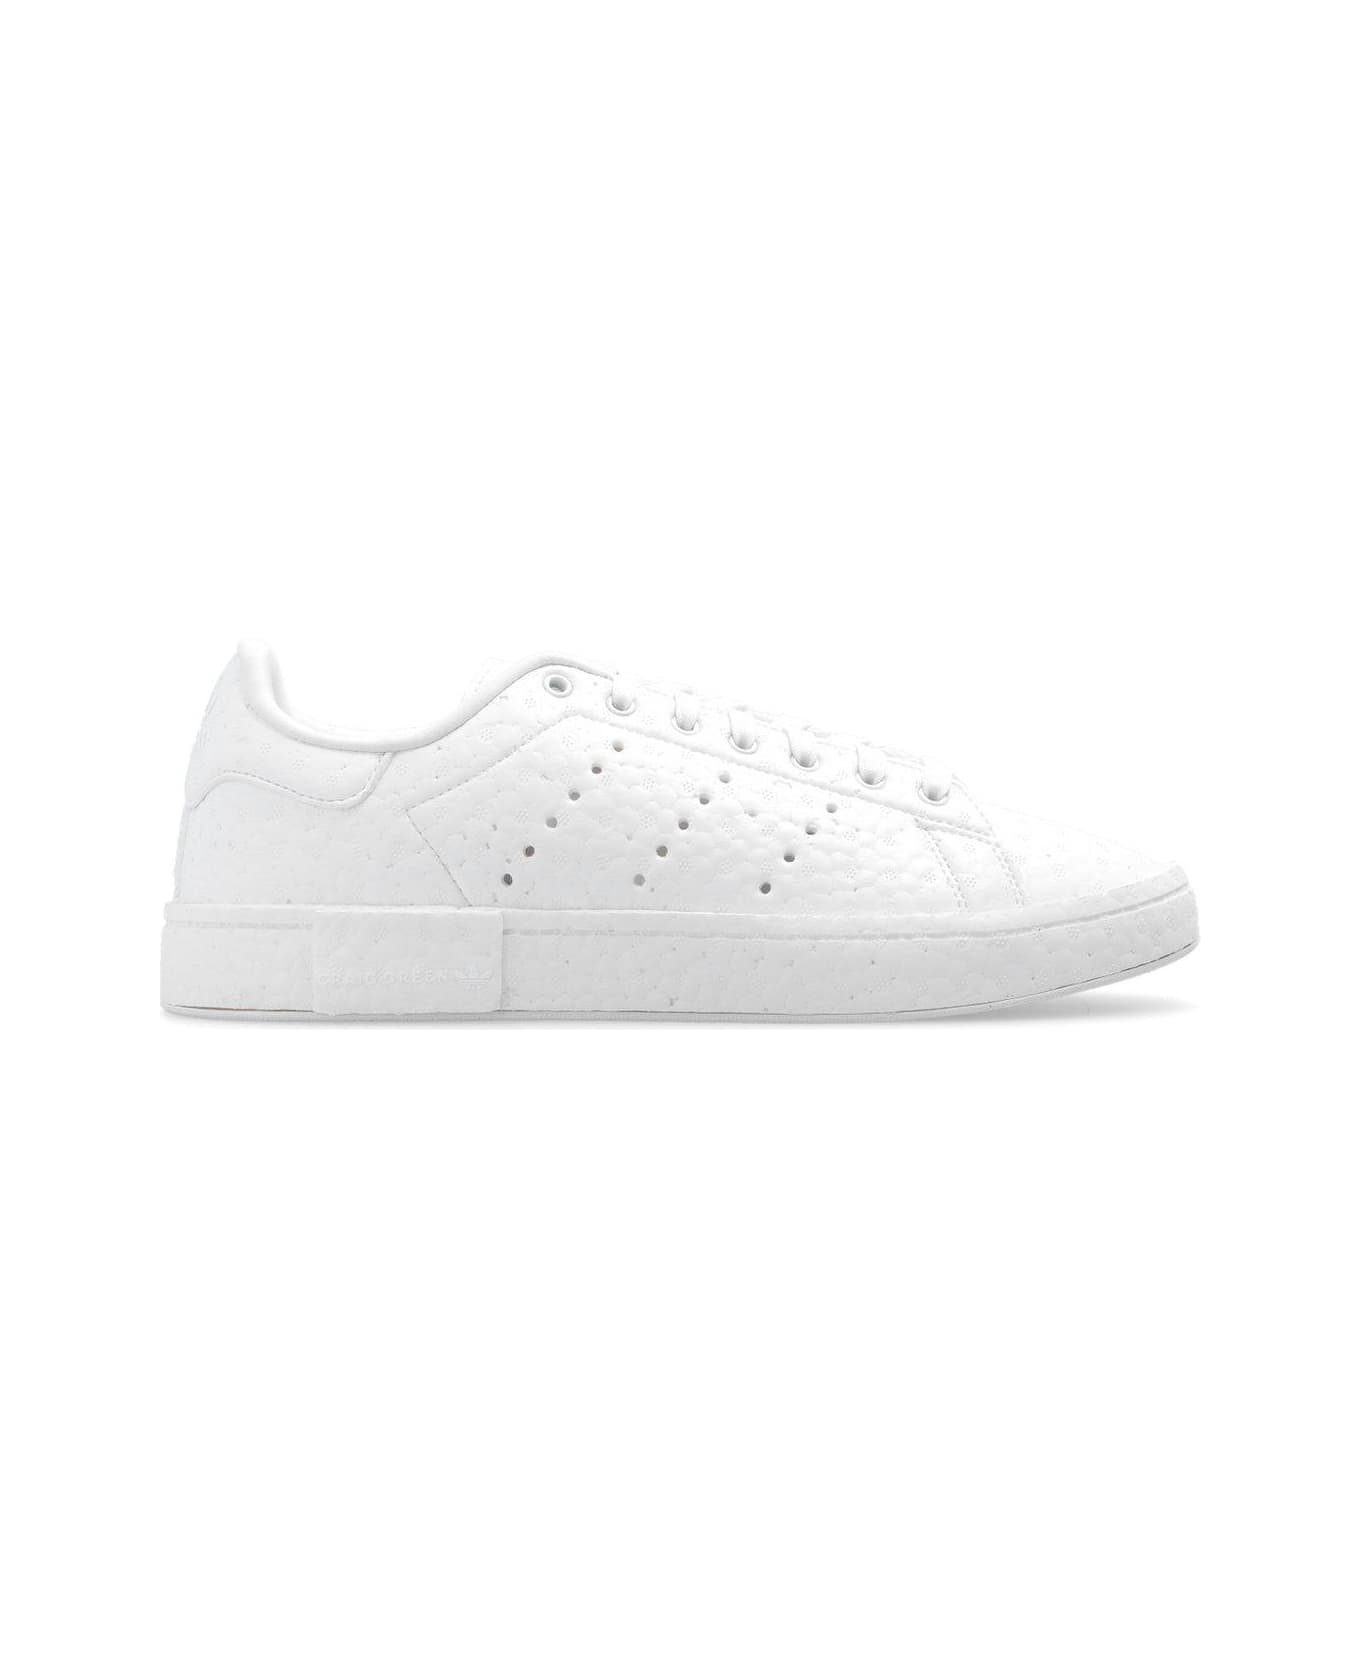 Adidas Originals by Craig Green X Craig Green Stan Smith Lace-up Sneakers - WHITE